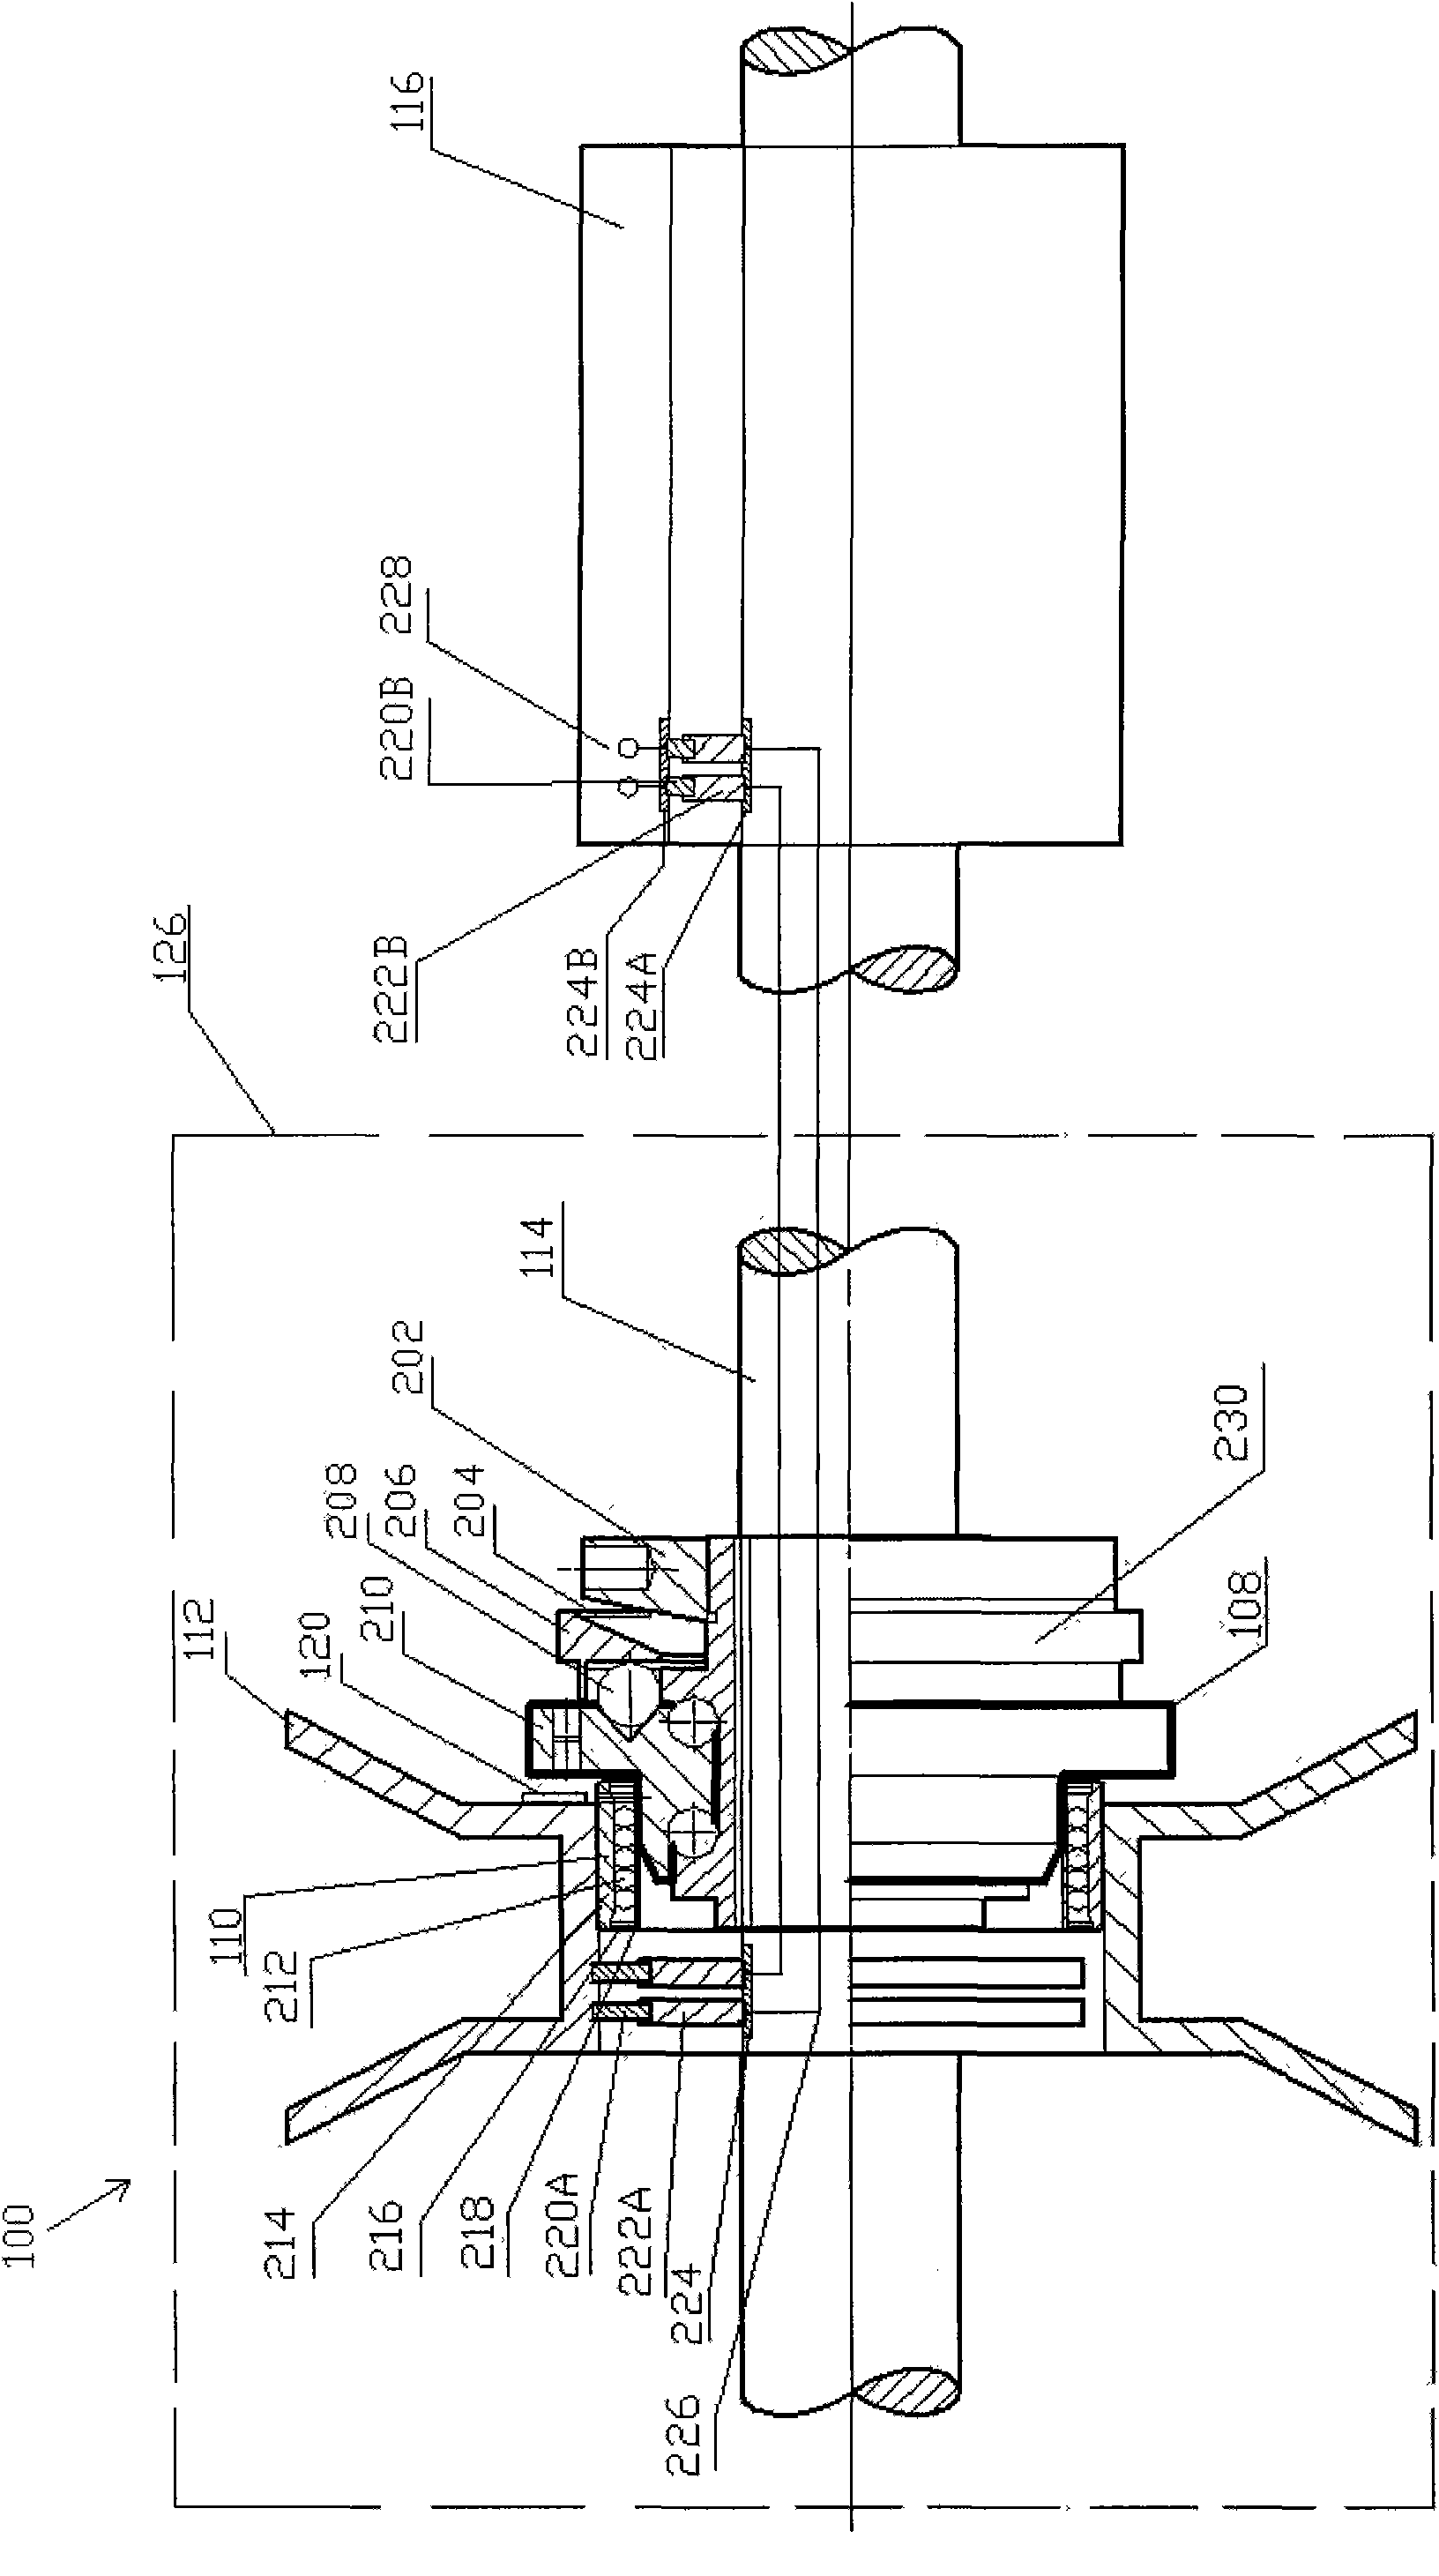 Device and method for taking up and laying cable conductors synchronously